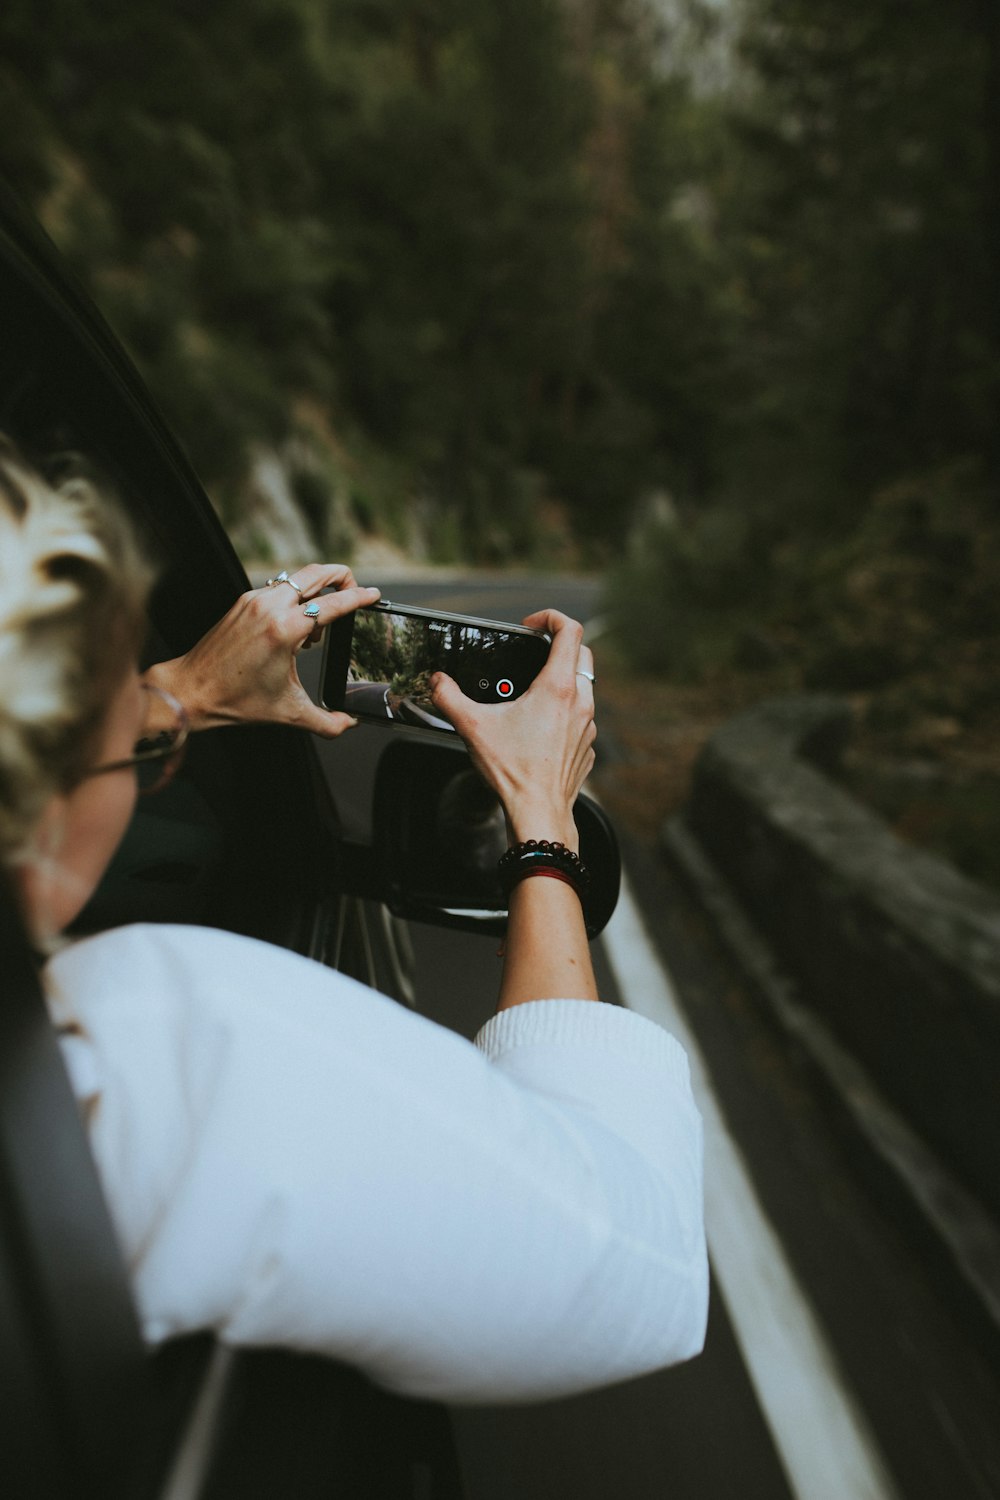 woman riding on the car holding smartphone taking a picture